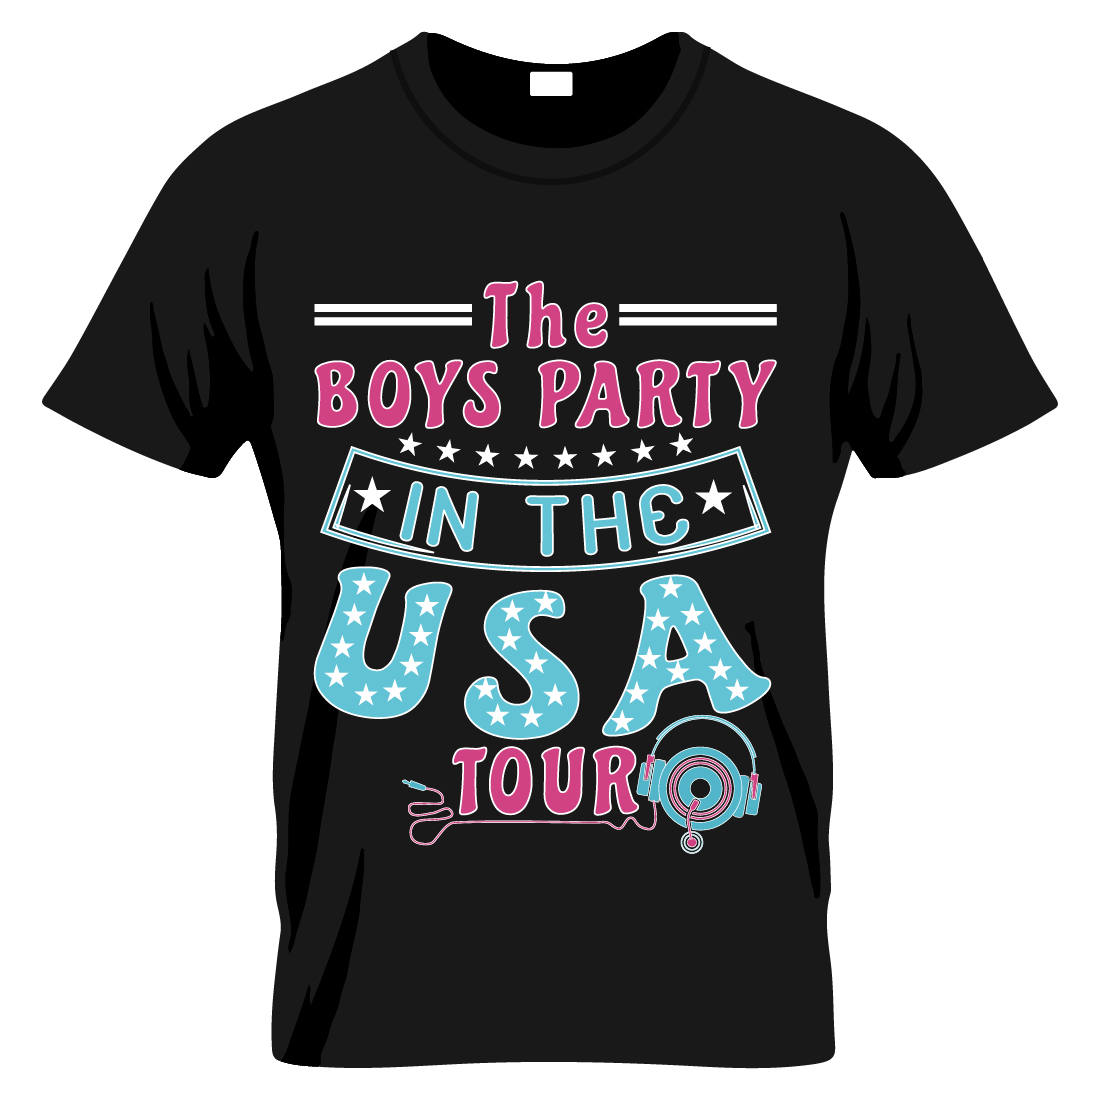 USA Party t shirt design cover image.